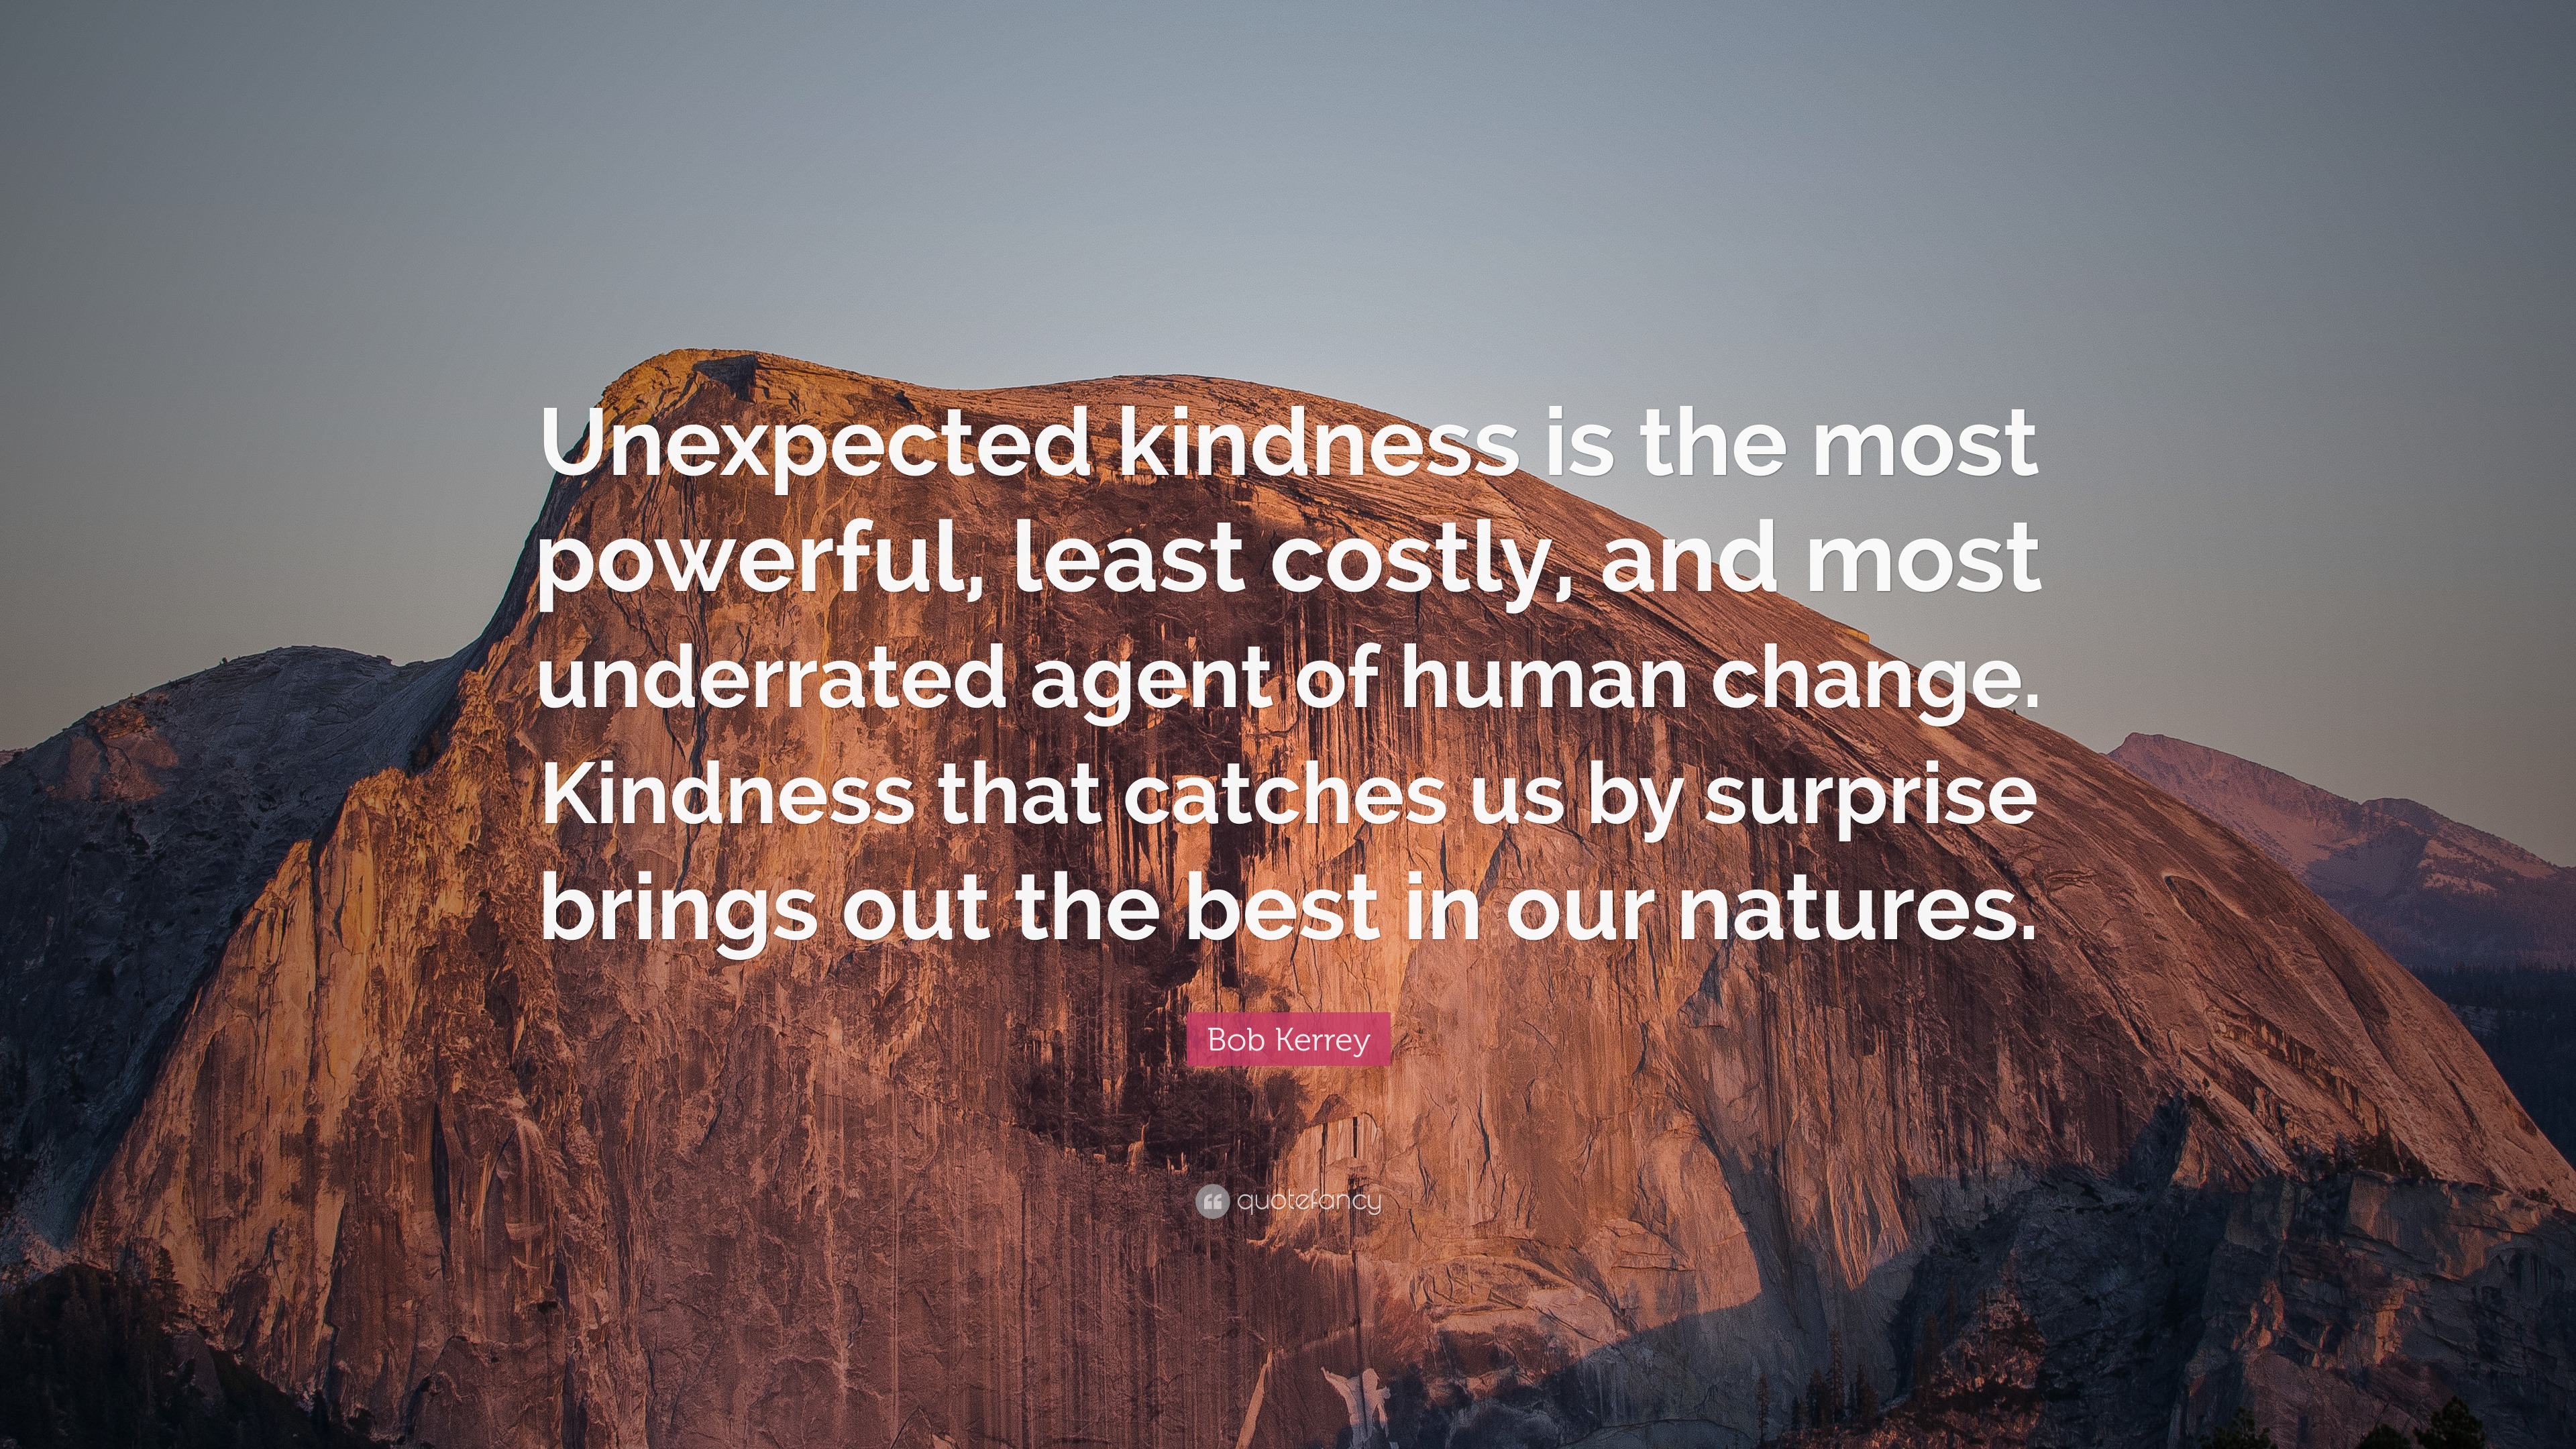 Bob Kerrey Quote: “Unexpected kindness is the most powerful, least ...